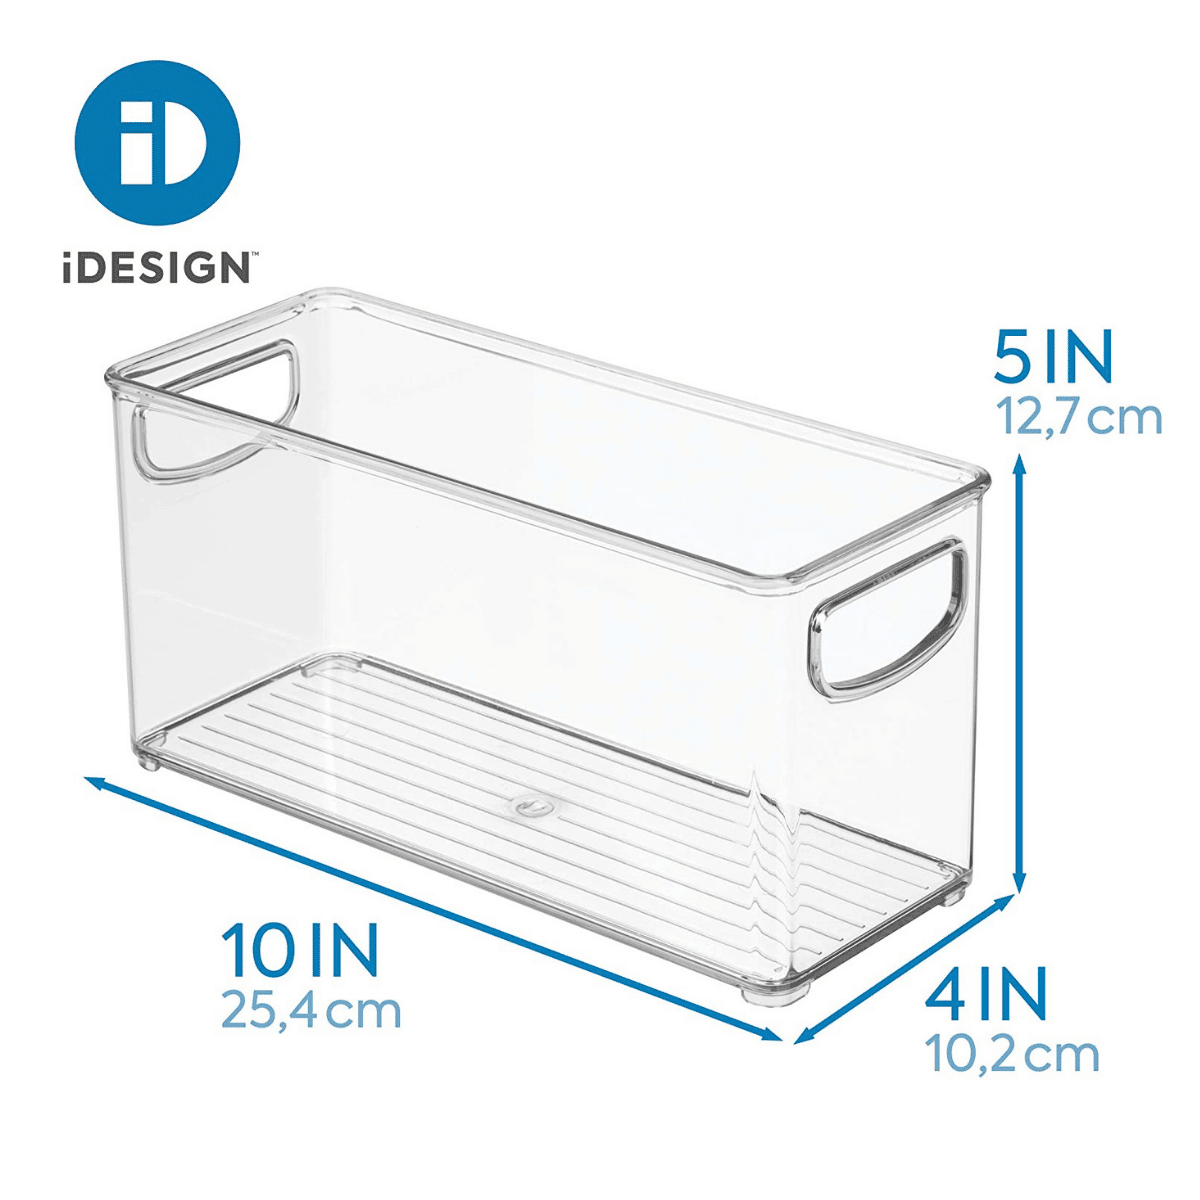 https://healthierspaces.com/wp-content/uploads/2021/09/HealthierSpaces.com-iDesign-Linus-BPA-Free-Plastic-Stackable-Organizer-Storage-Bin-with-Handles-for-Kitchen-Pantry-Bathroom-Small-3.png